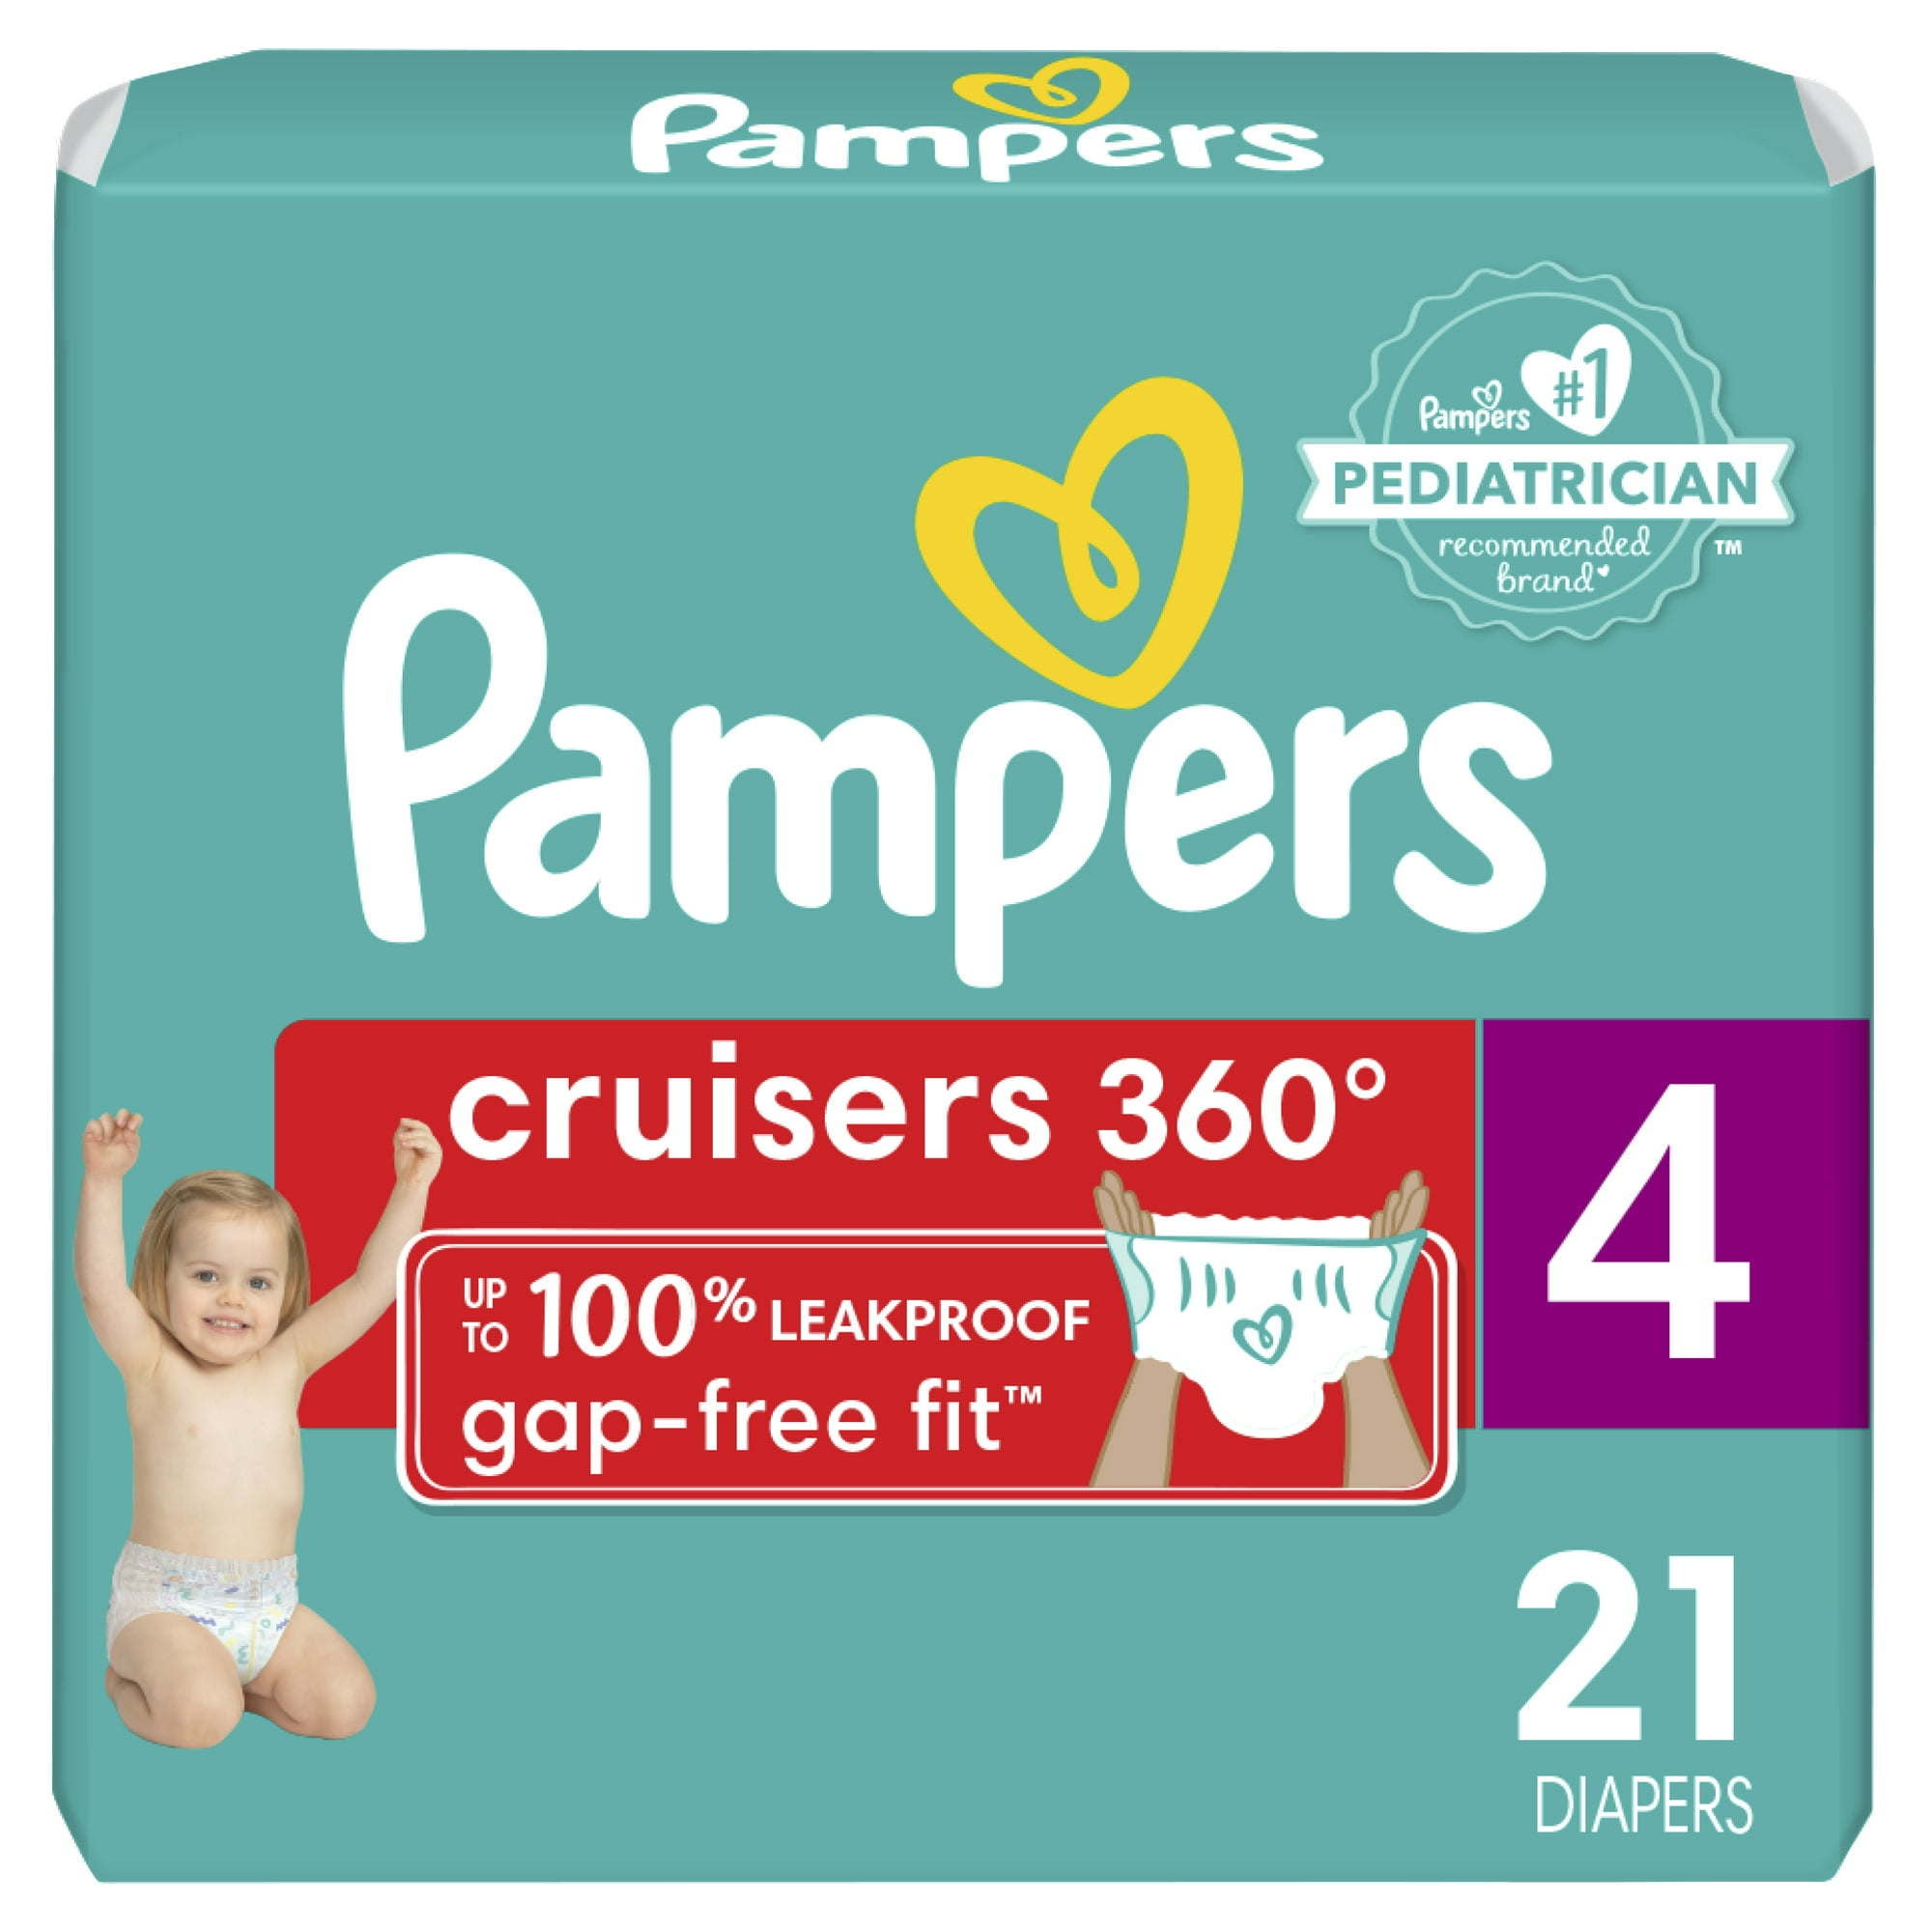 Pampers Cruisers 360 Fit Diapers, Active Comfort, Size 4, 21 Count, Size: 21 Count, 4, White